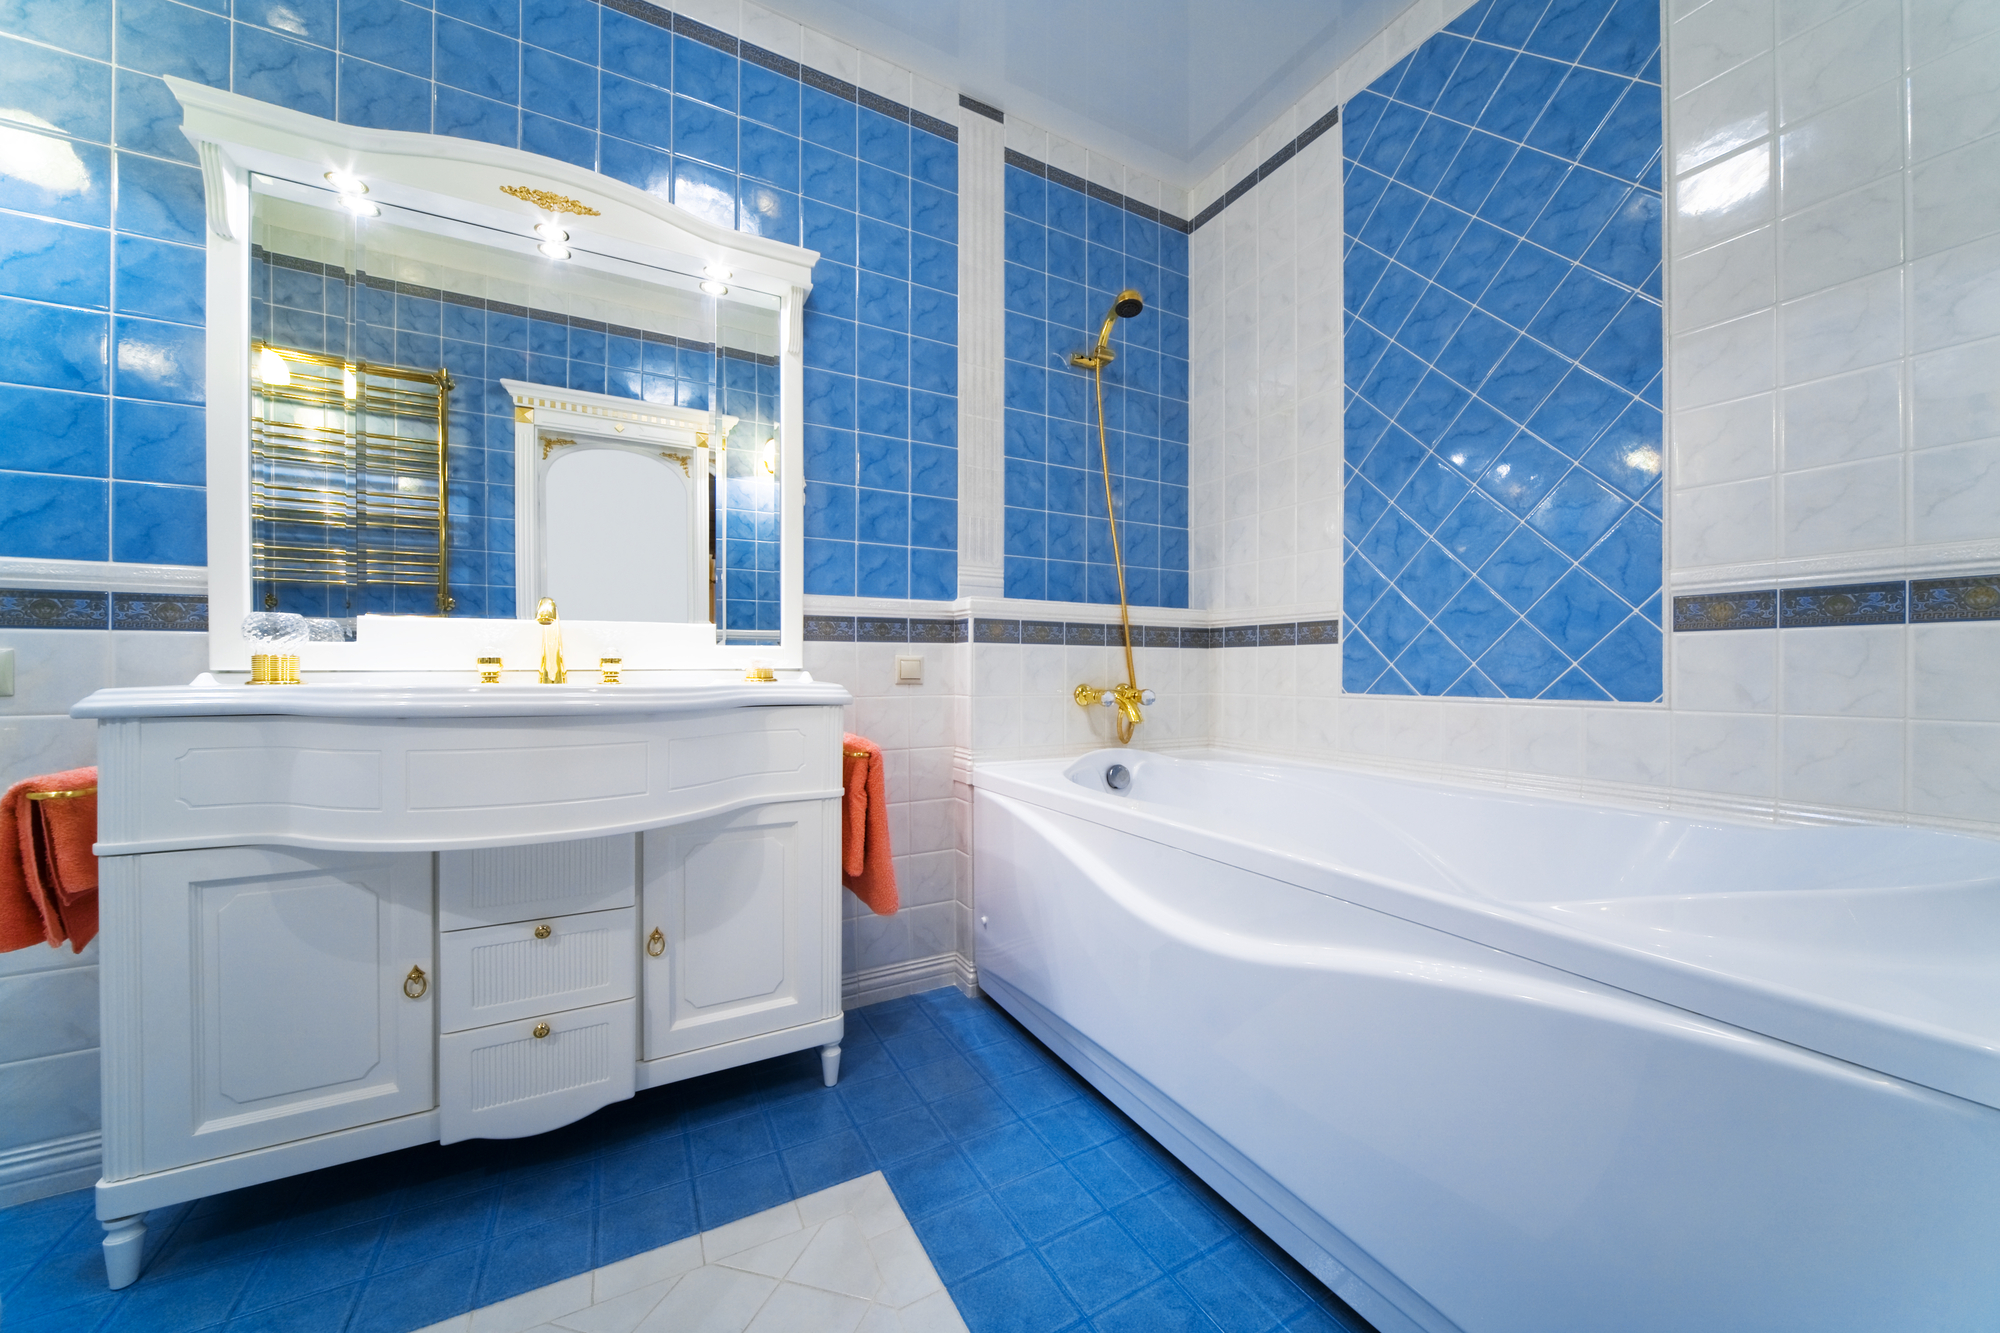 Exploring the Top Trends Shaping the Plumbing Industry